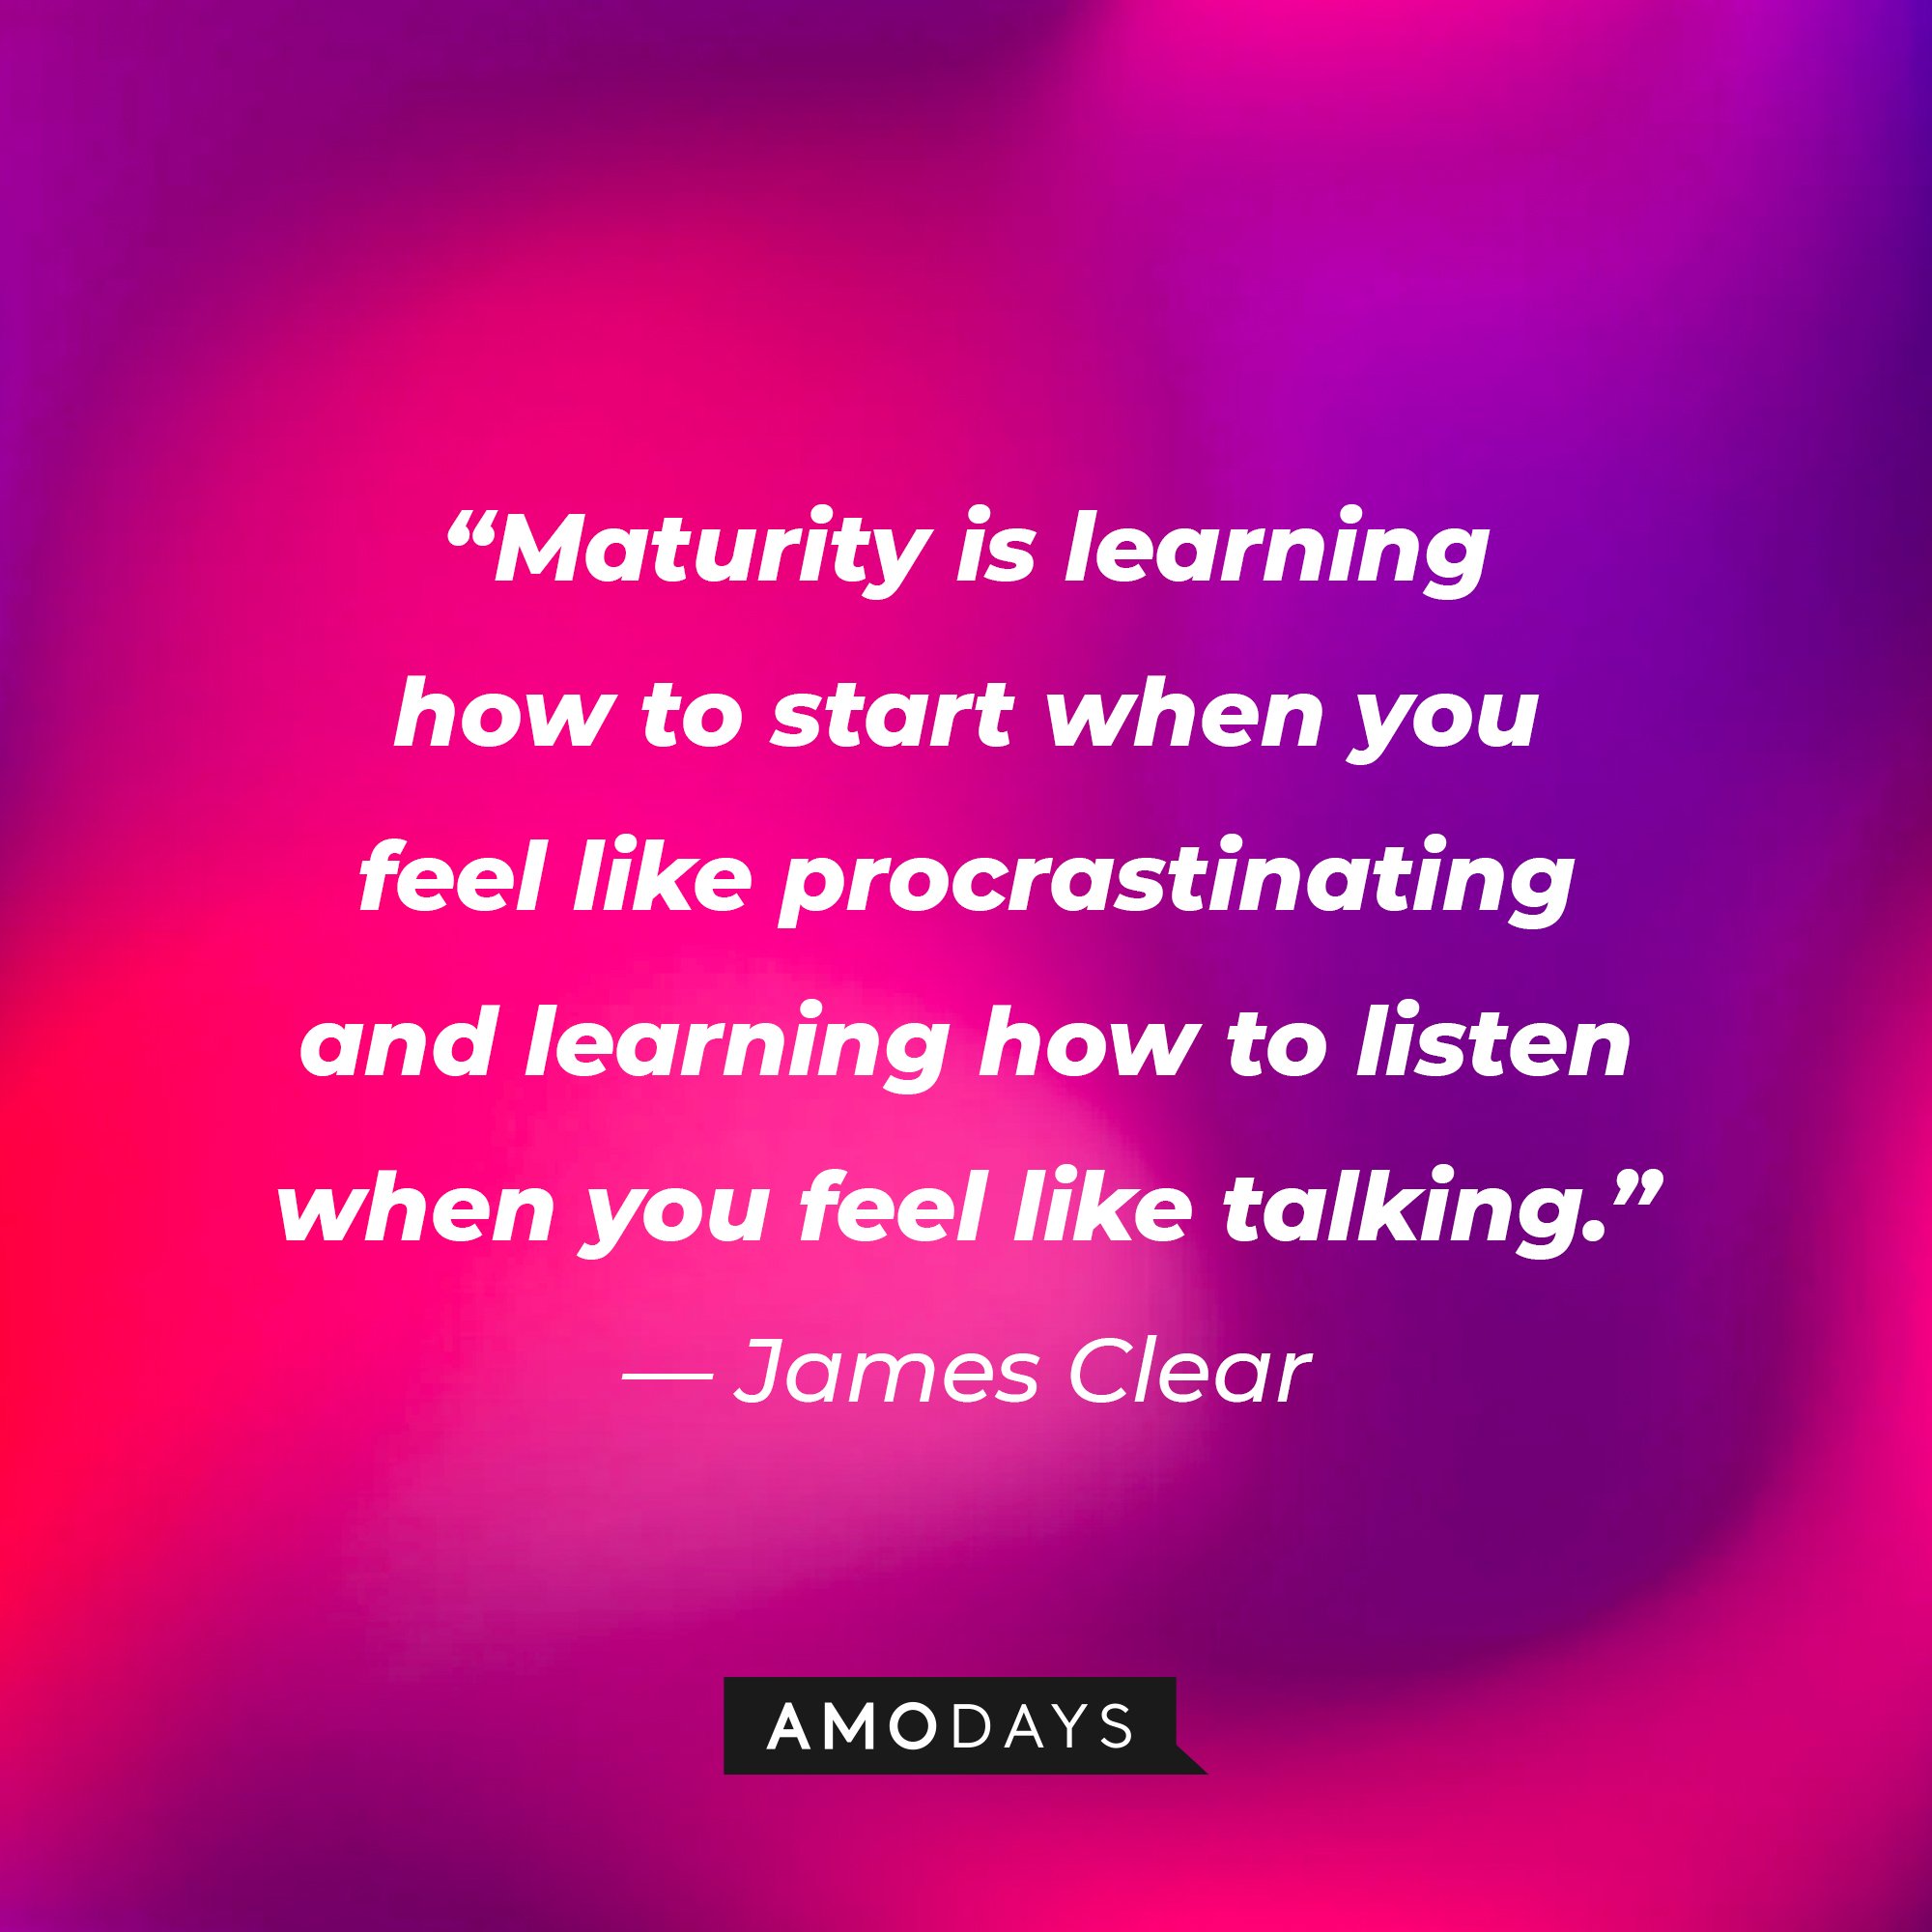 James Clear's quote: “Maturity is learning how to start when you feel like procrastinating and learning how to listen when you feel like talking.” | Image: AmoDays